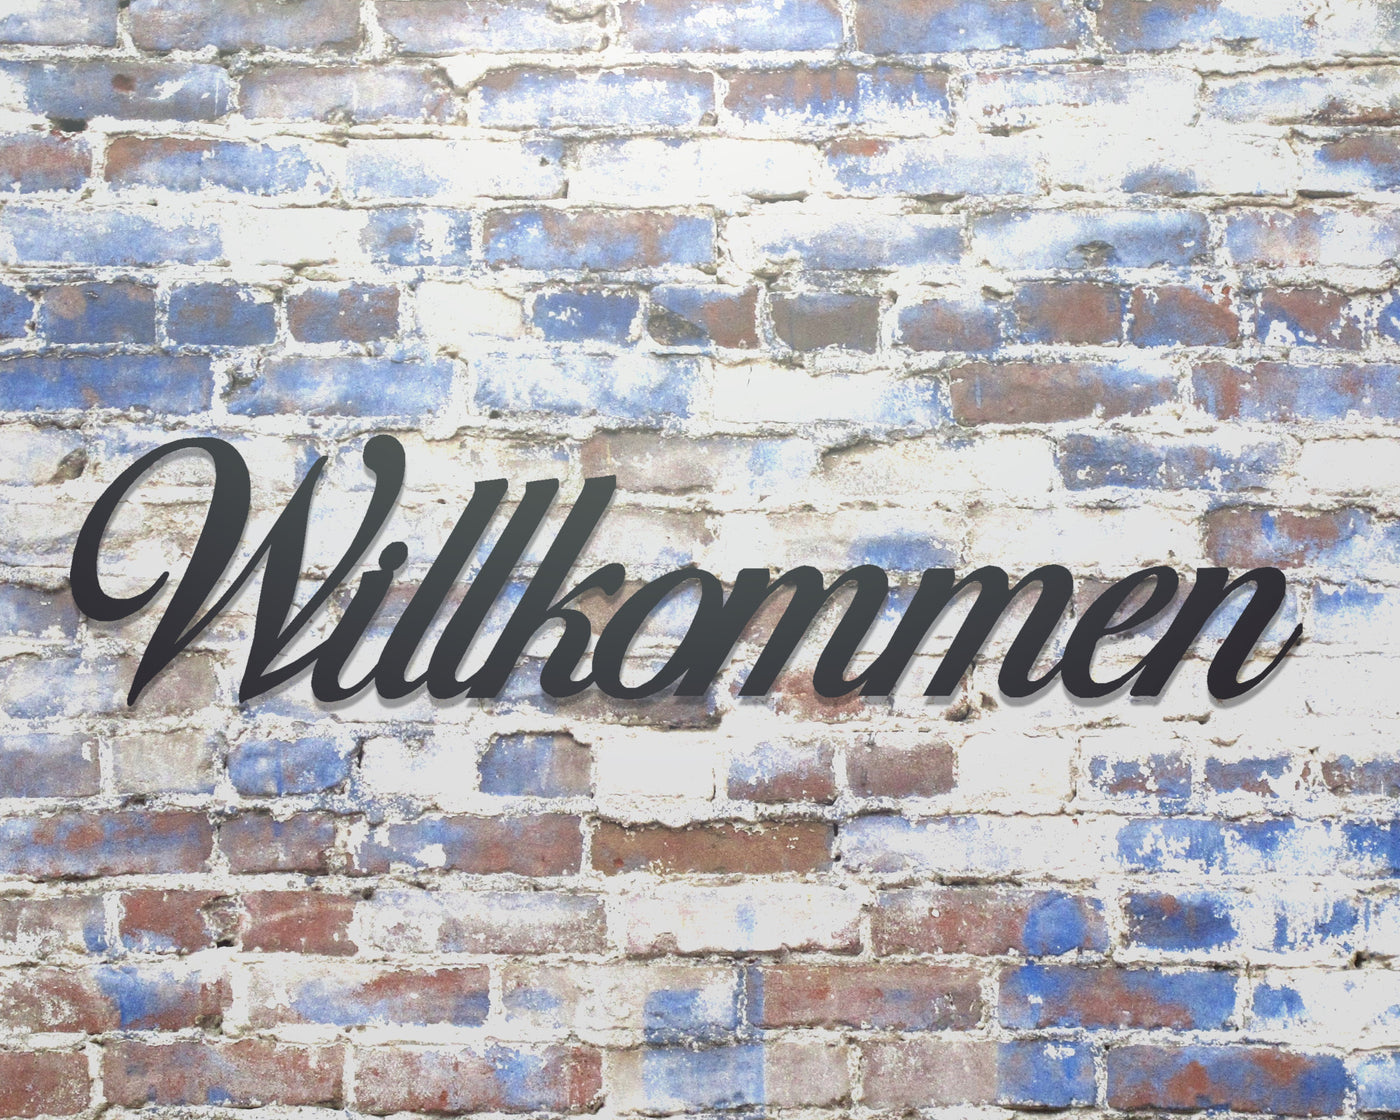 Willkommen Metal Word Sign - Madison Iron and Wood - Wall Art - metal outdoor decor - Steel deocrations - american made products - veteran owned business products - fencing decorations - fencing supplies - custom wall decorations - personalized wall signs - steel - decorative post caps - steel post caps - metal post caps - brackets - structural brackets - home improvement - easter - easter decorations - easter gift - easter yard decor